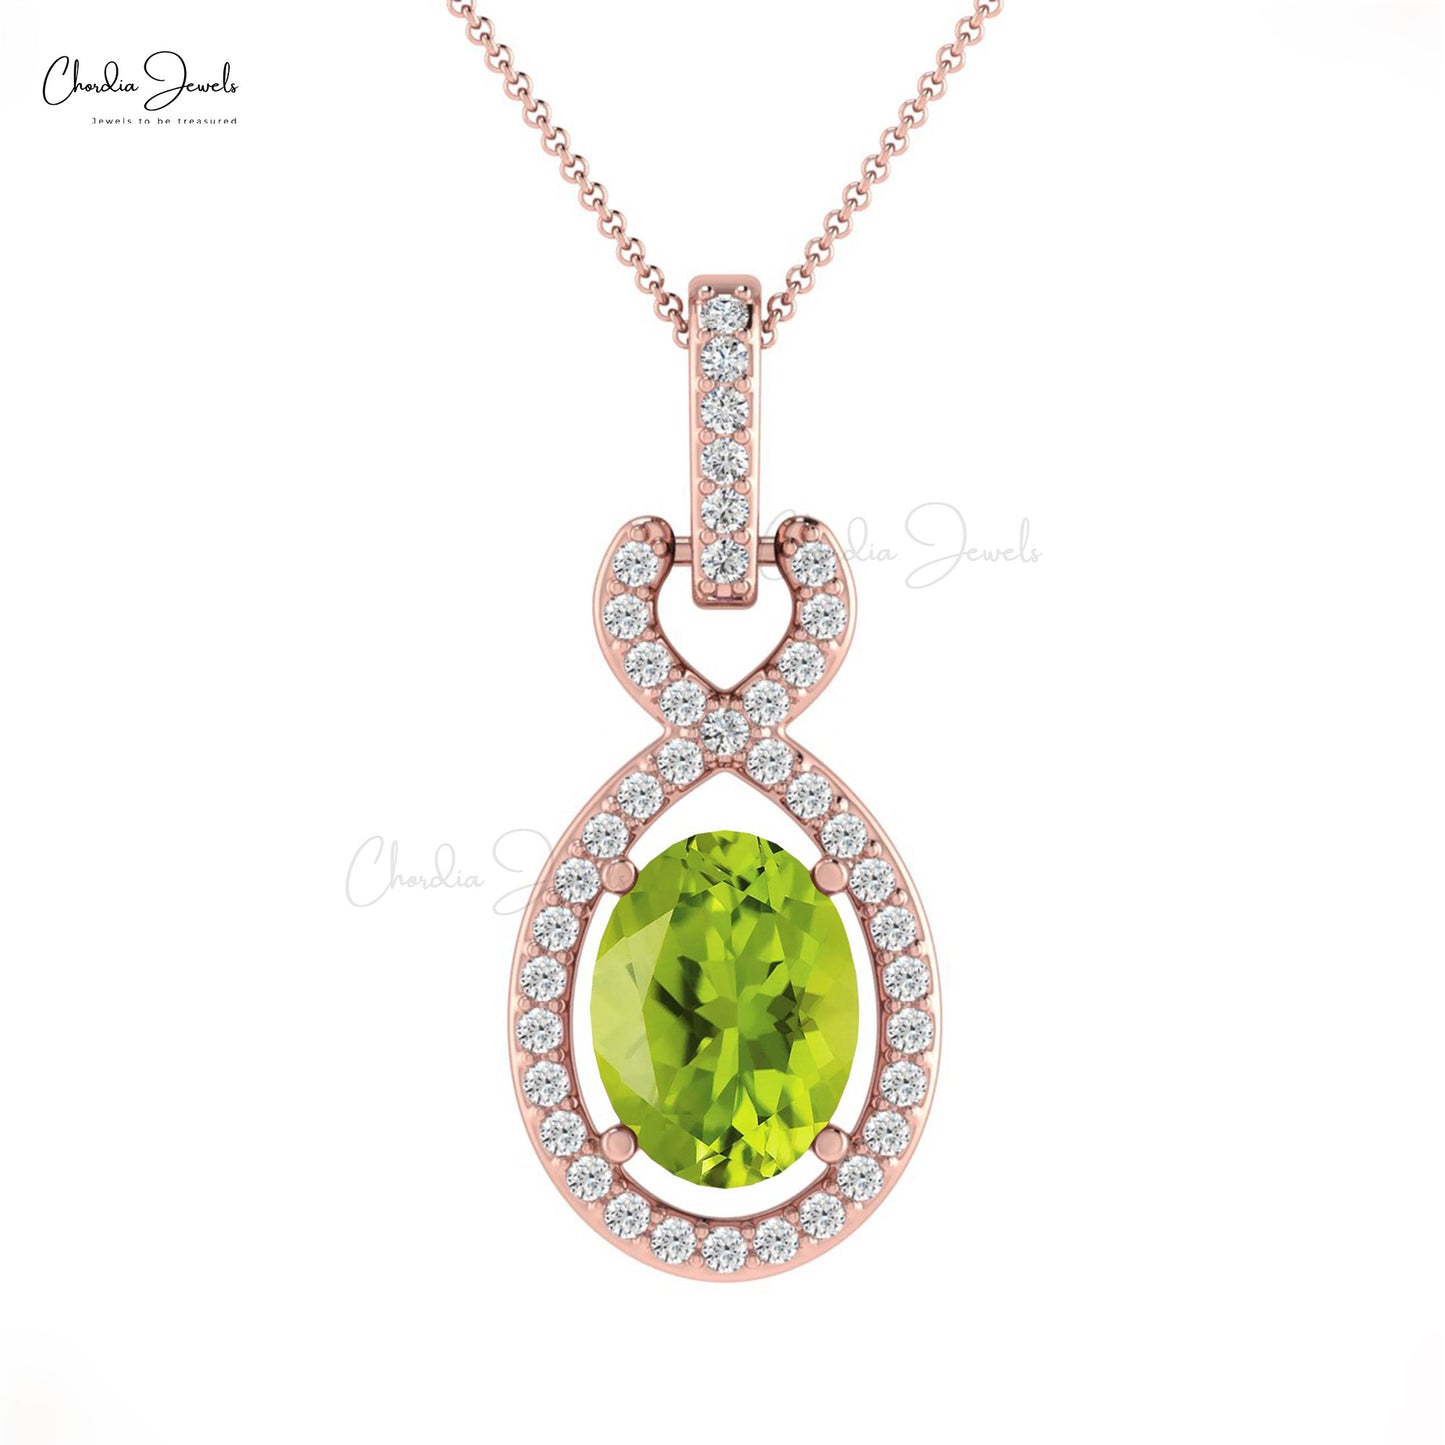 Load image into Gallery viewer, New Light Luxury Female Personality Genuine Diamond Halo Pendant Necklace Green Peridot Gemstone Solitaire Pendant 14k Real Gold Fine Jewelry For Bridesmaid Gift
